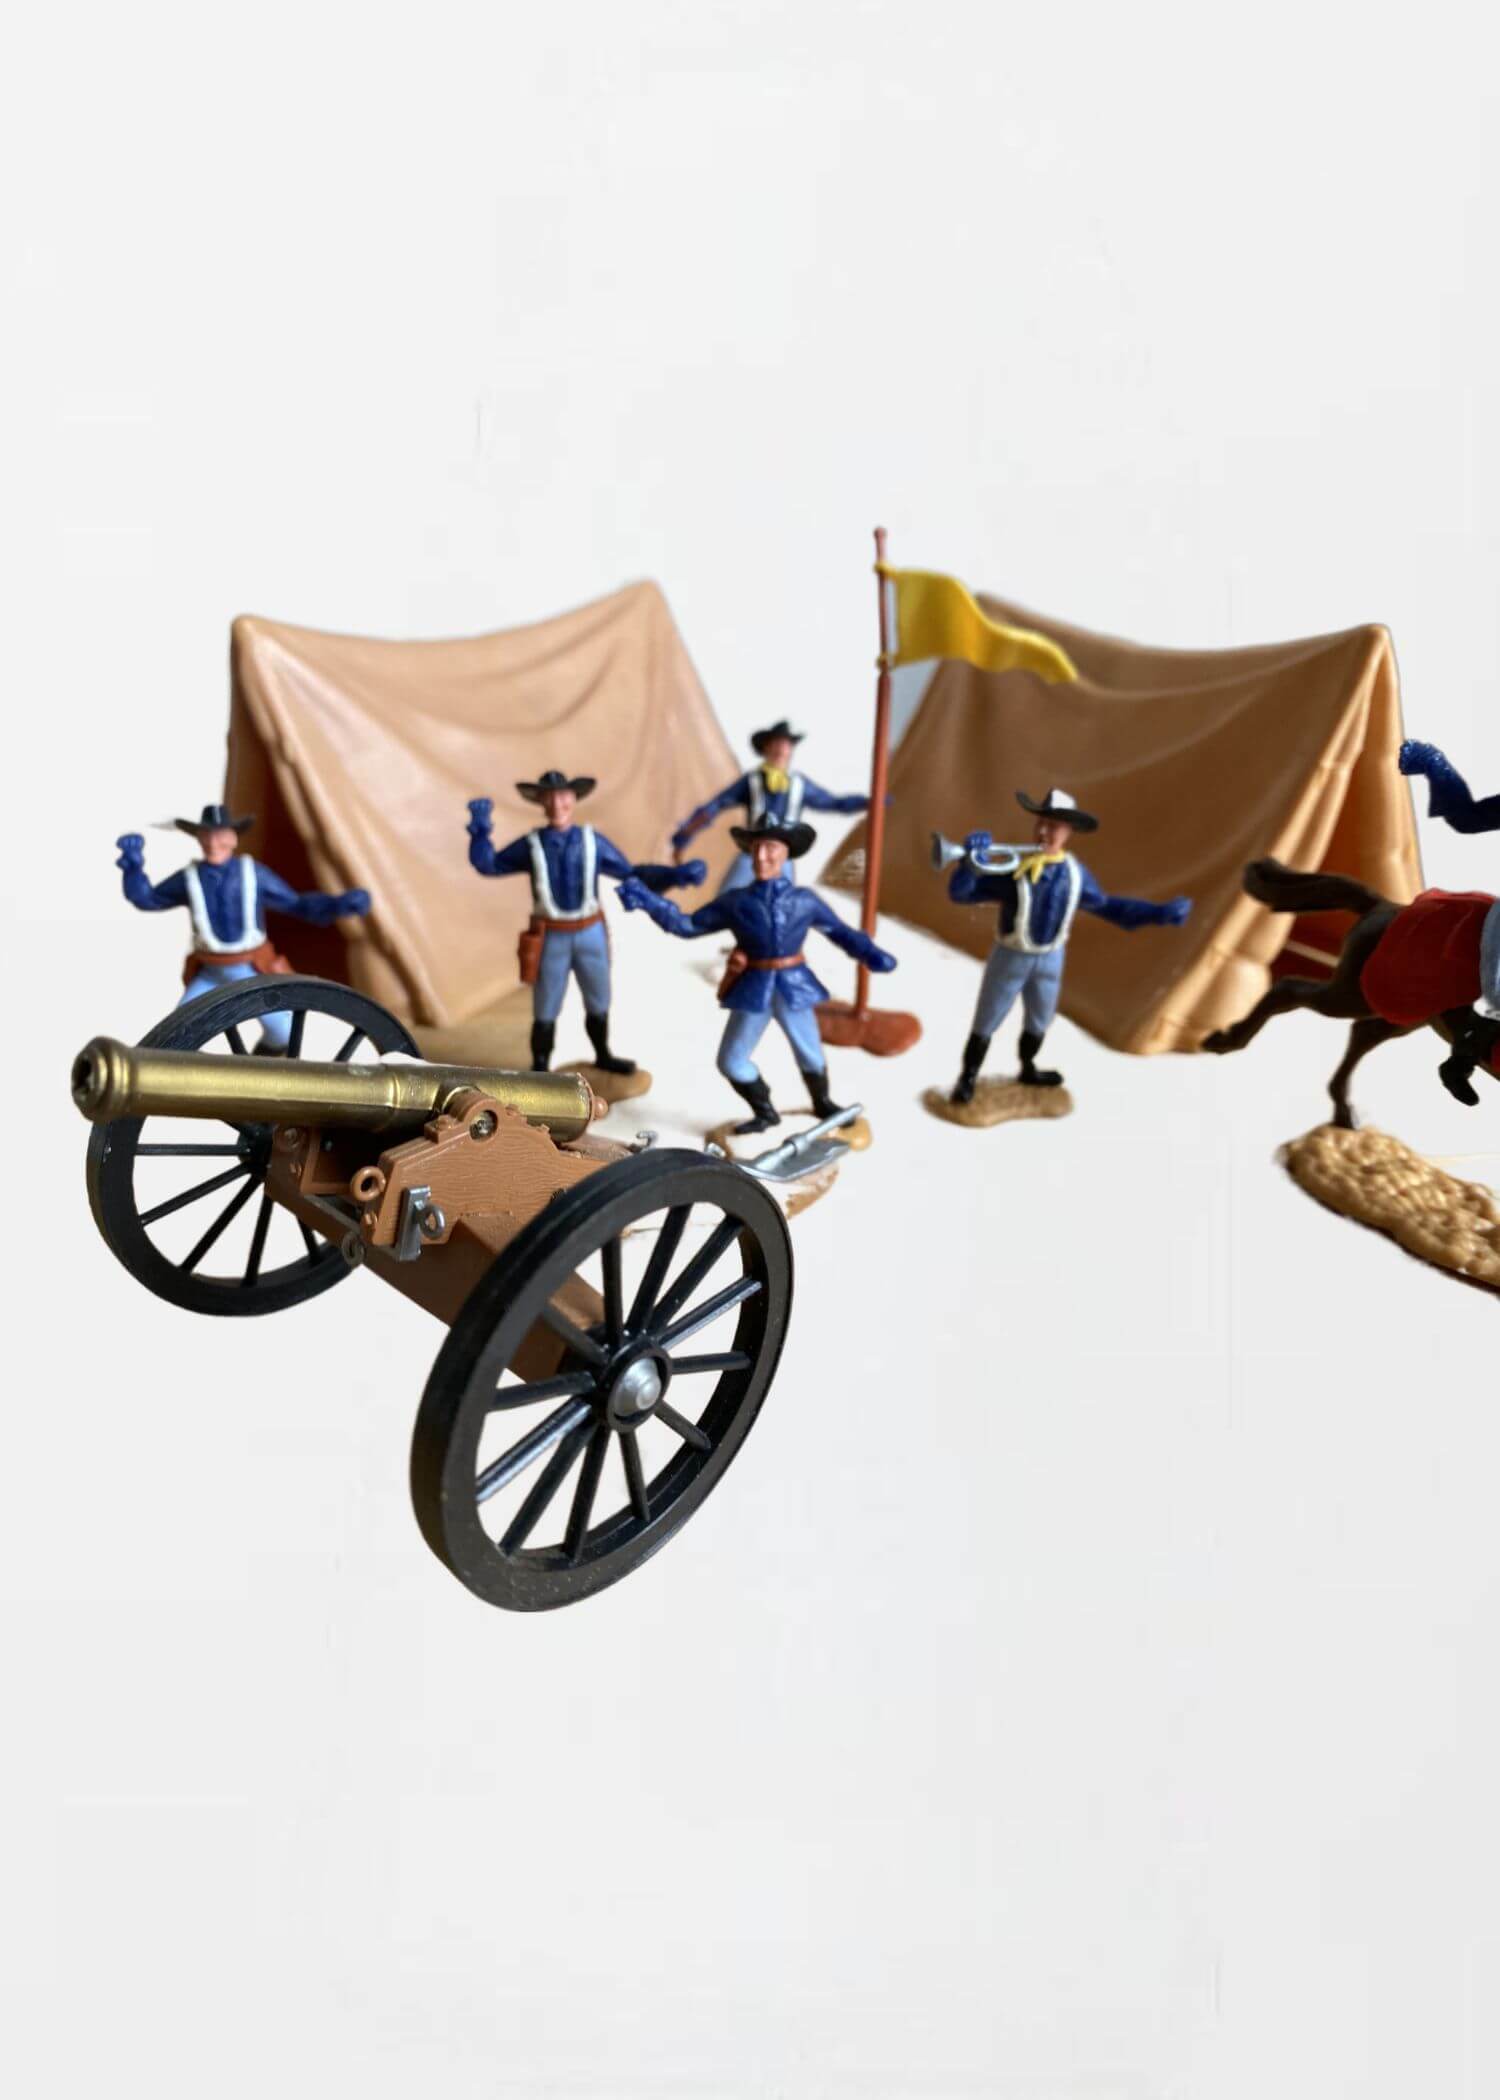 Timpo Wild West  Classic vintage kids toys figurines 7th Calvary five soldiers, two tents, flag pole, one soldier on horseback and cannon c1960s Made in Great Britain Scottish collectors British collectibles 